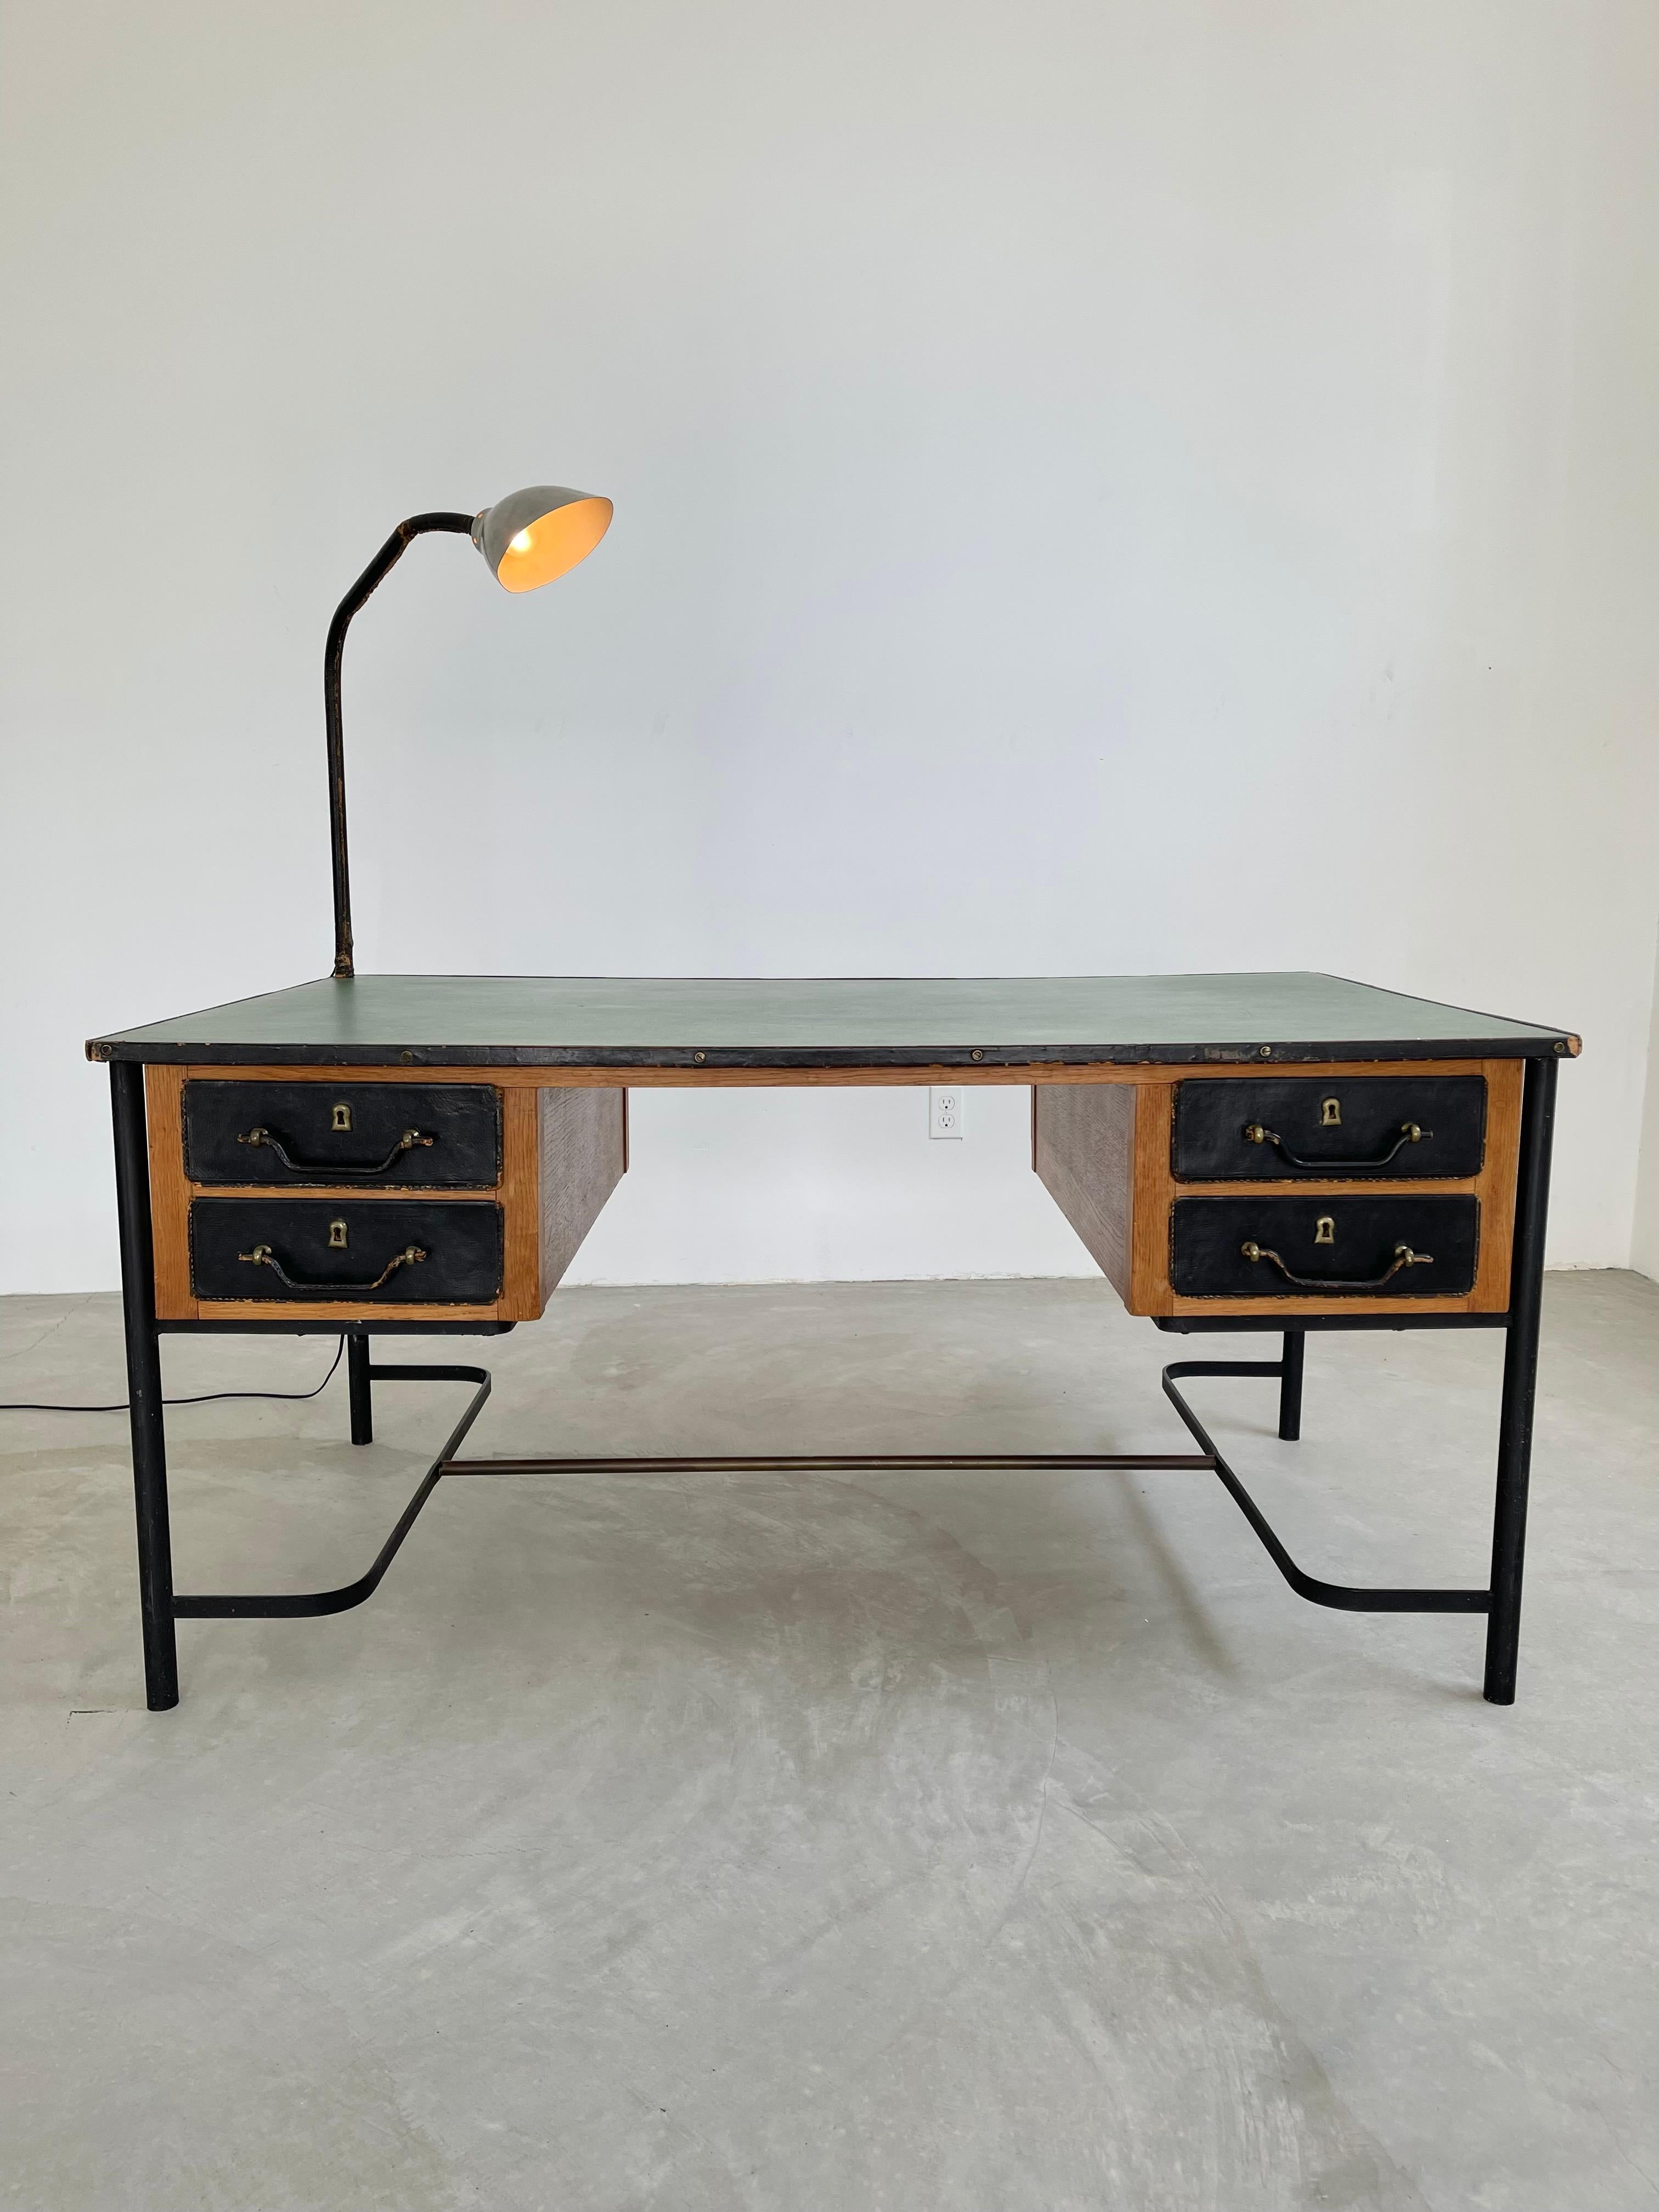 Monumental Art Deco era desk by French Art Deco Modernist designer Jacques Adnet. Iron frame with 4 posts, inverted u-shaped bases and brass support bar/foot rest connecting the two. Heavy oak frame wrapped in black leather with brass hardware. Two